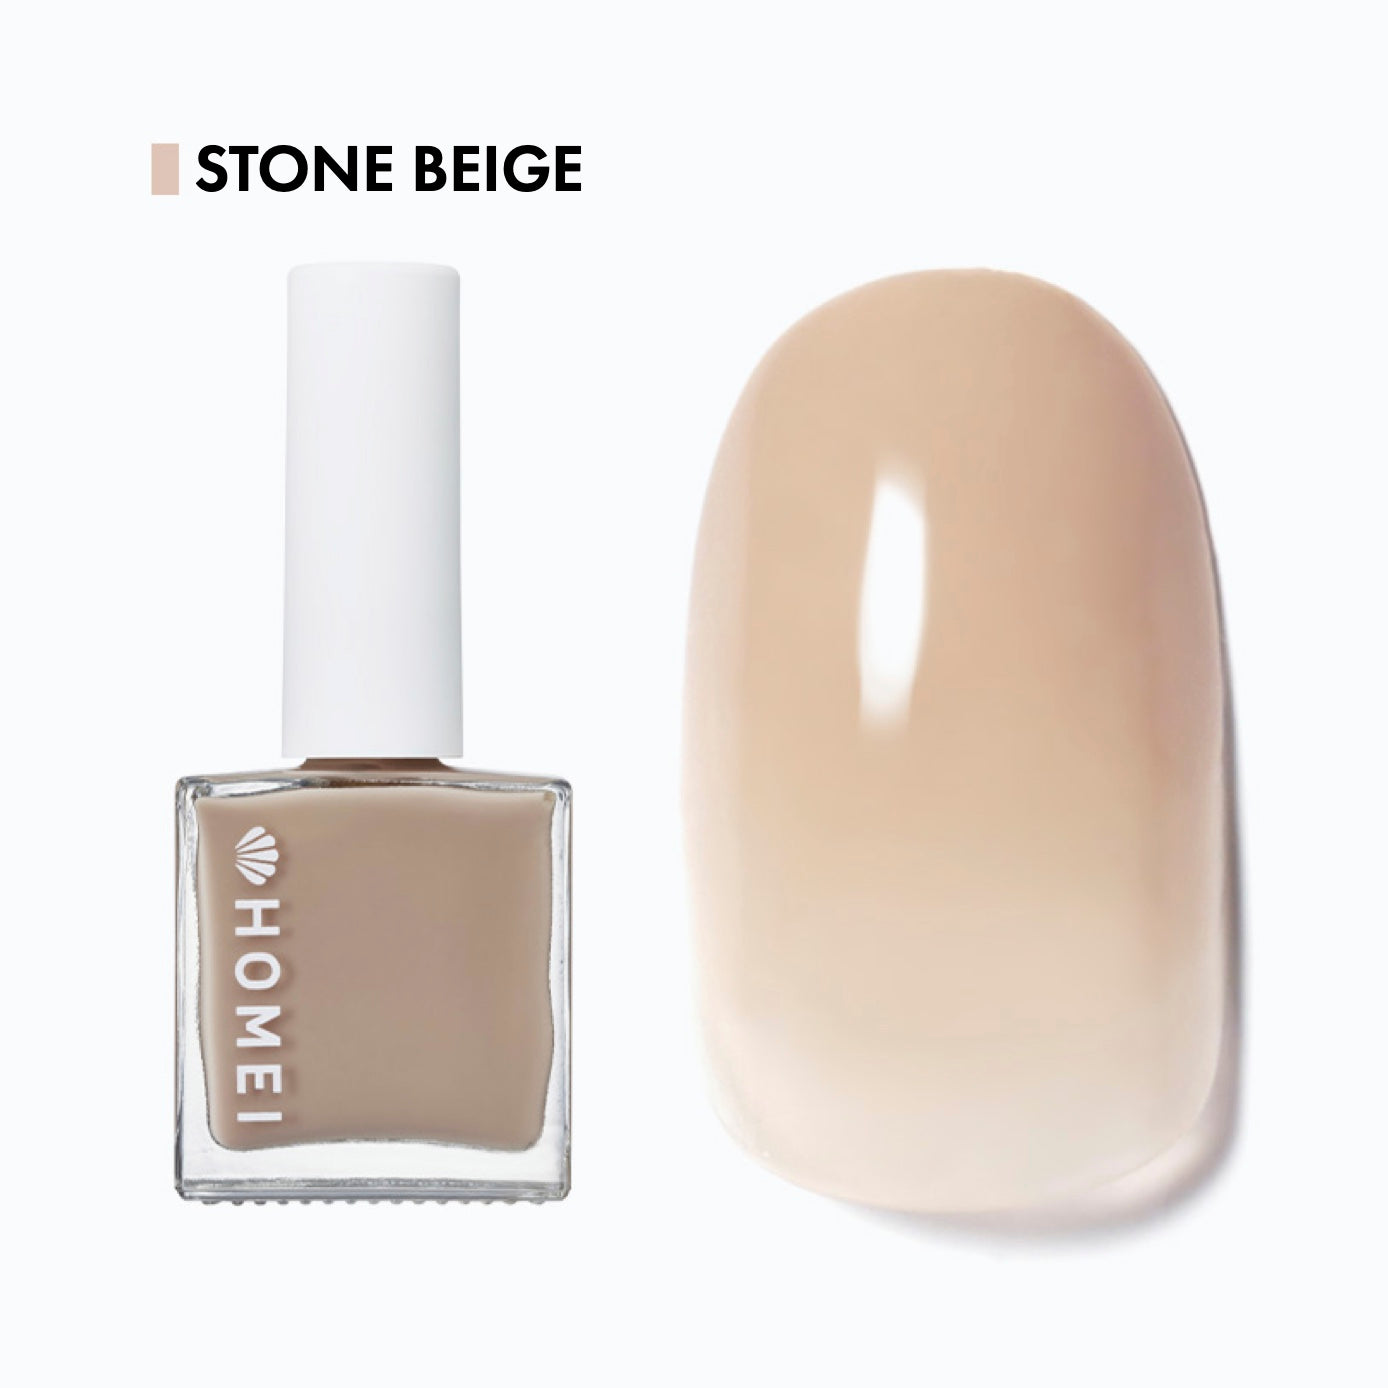 Nail cover hardener nail care polish with stylish nude color "Stone Beige". Branded by HOMEI Weekly Gel. Free from 12 harsh ingredients so we name this 12FREE.